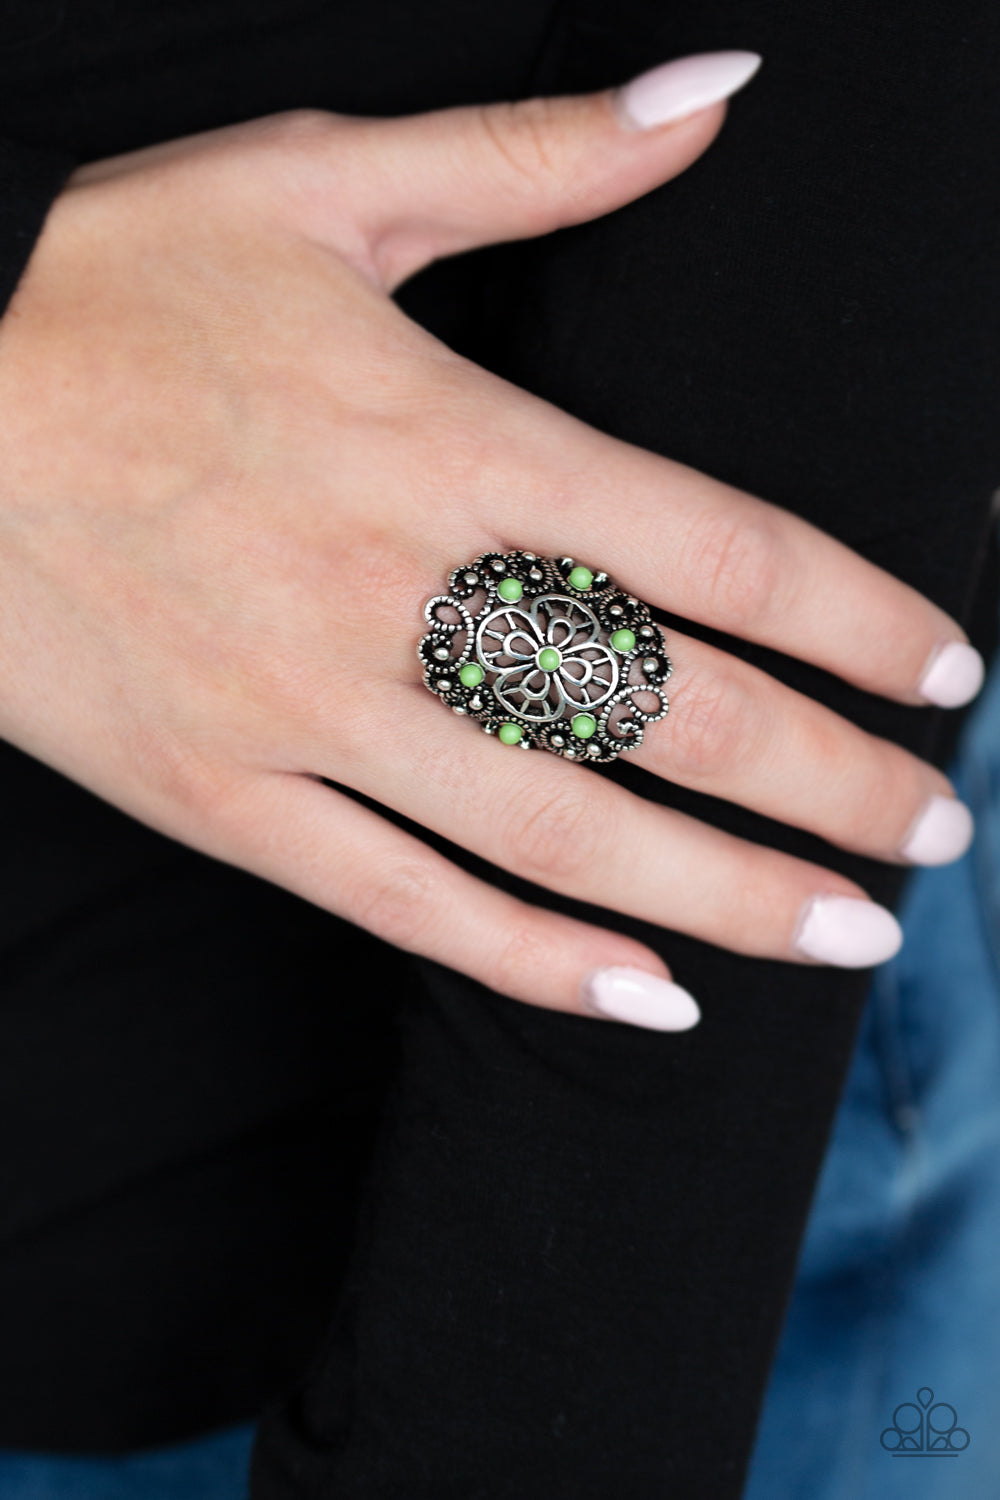 Floral Fancies - Green and Silver Ring - Paparazzi Accessories - Dainty green beads are sprinkled across a shimmery frame swirling with silver filigree, creating a whimsical floral frame atop the finger. Features a stretchy band for a flexible fit. Sold as one individual fashion ring.